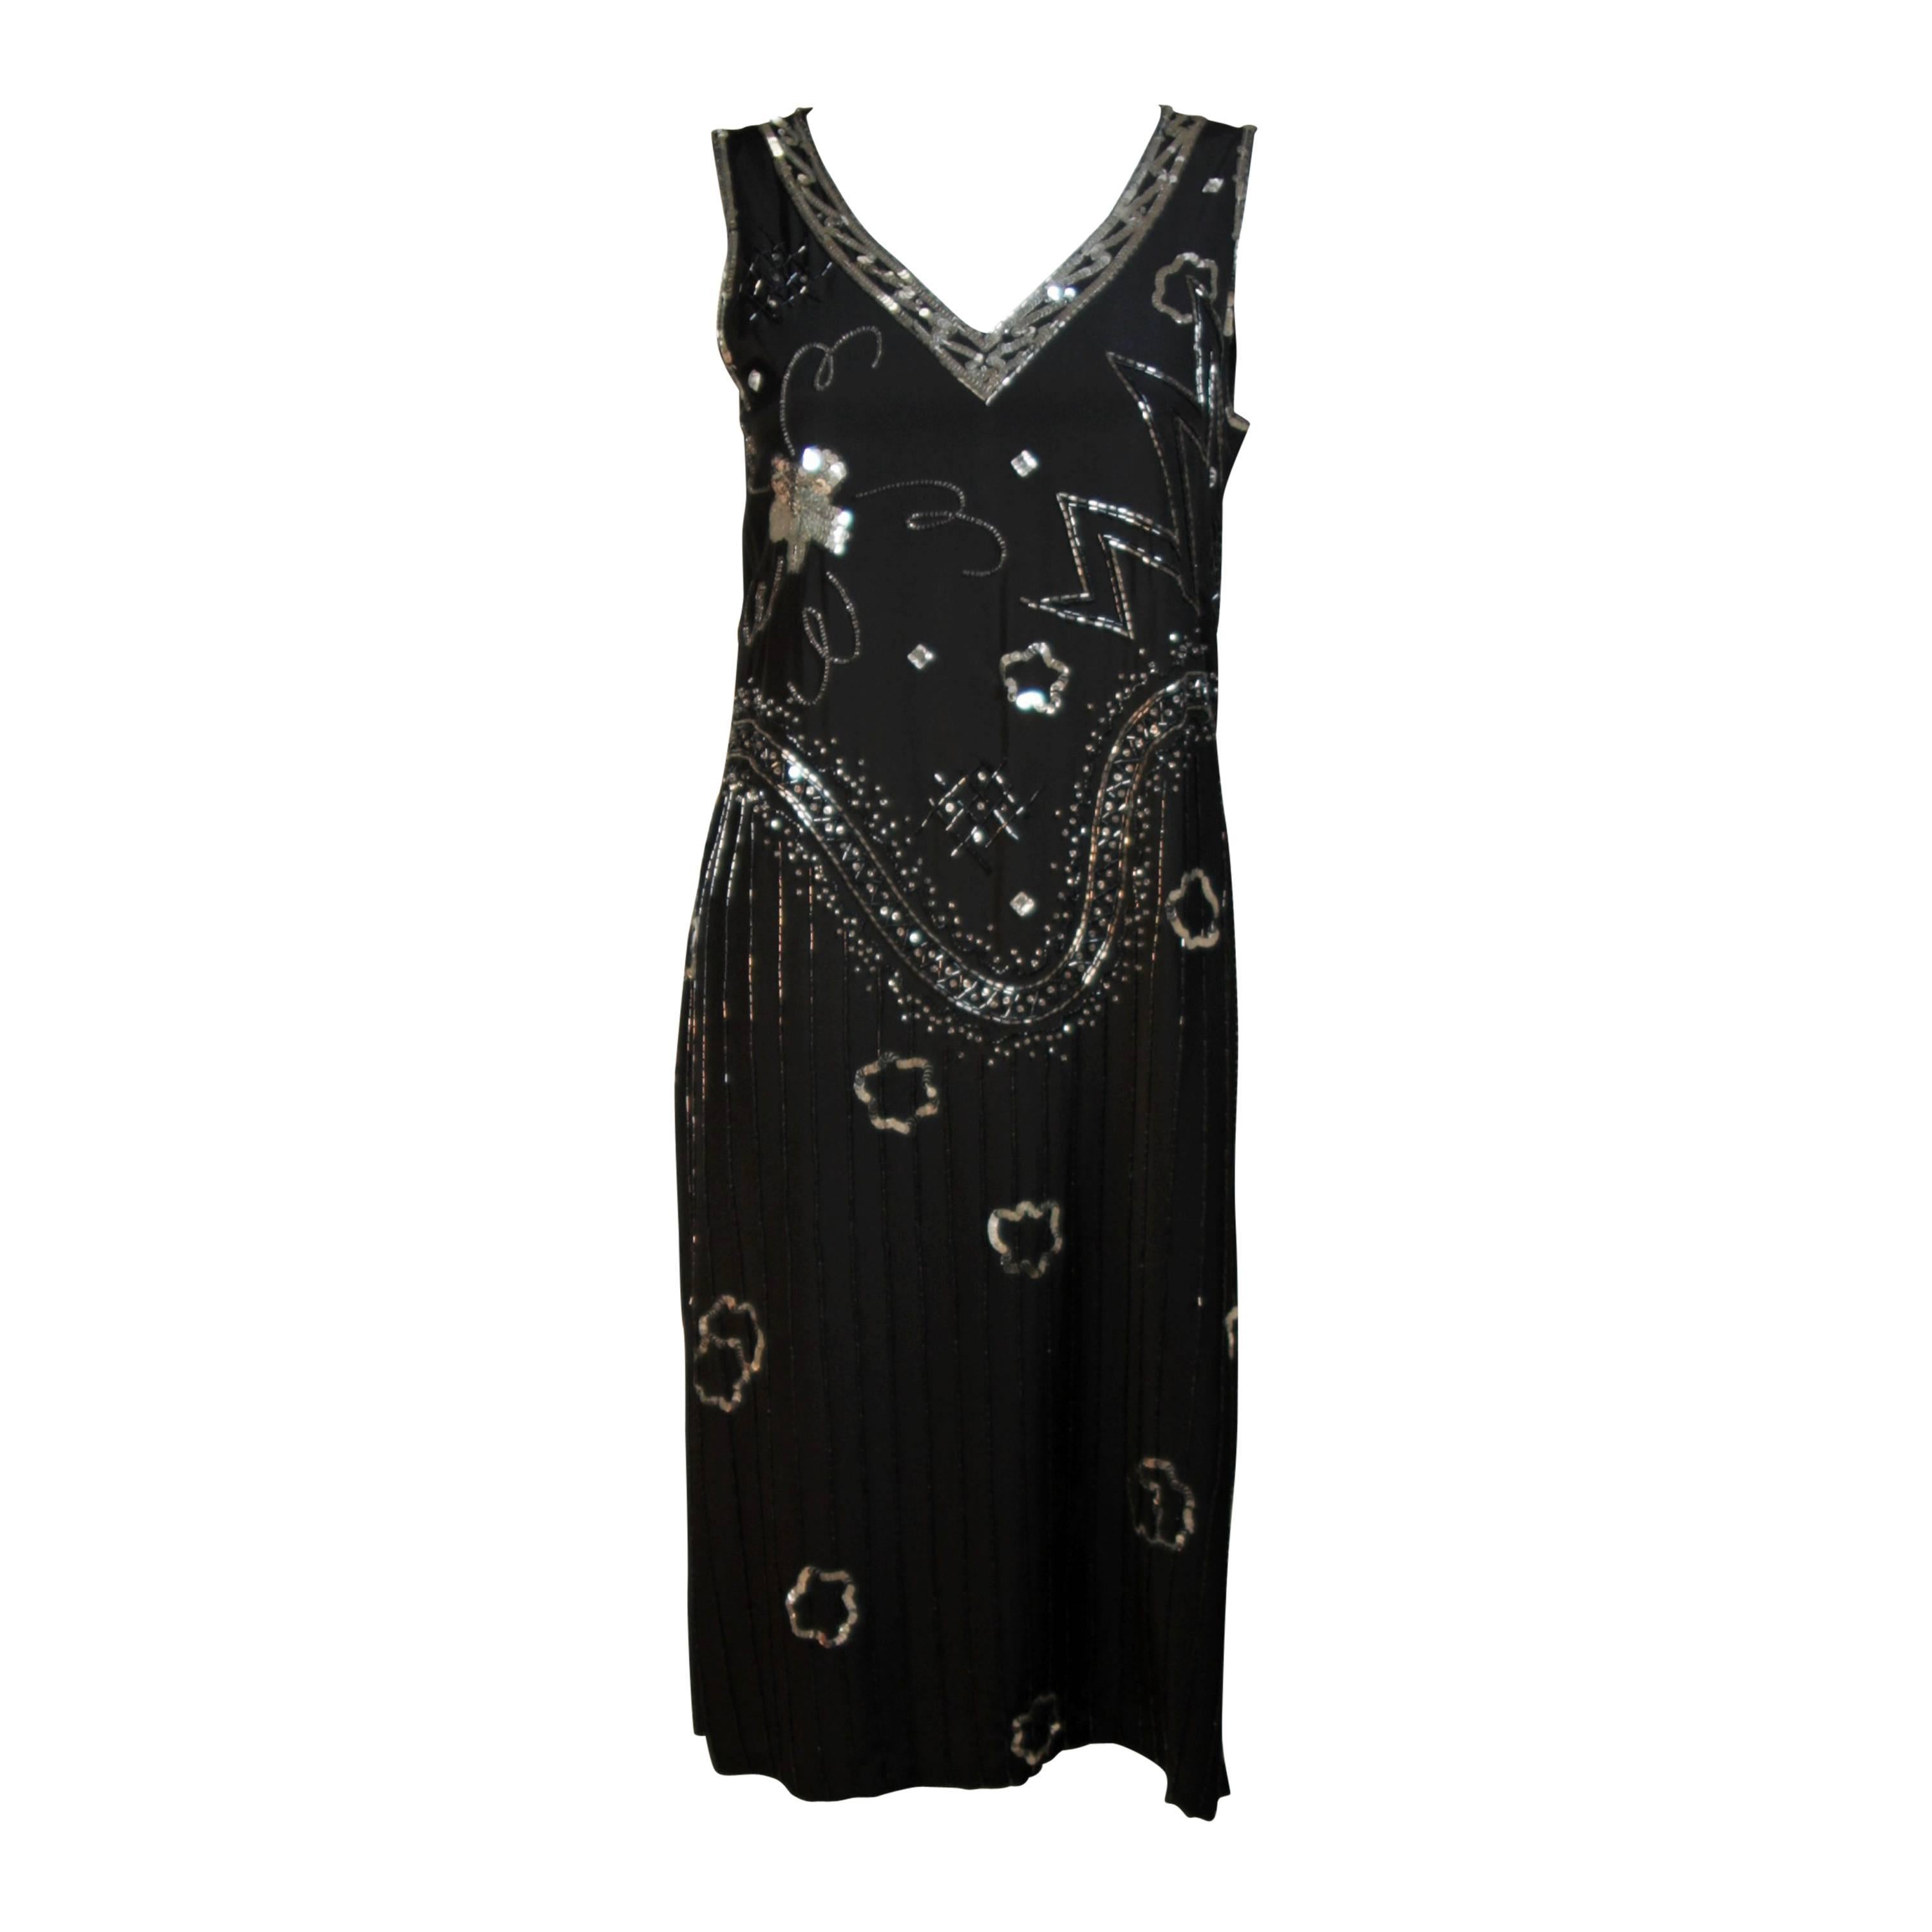 GIORGIO BEVERLY HILLS Sequin Embellished Deco Inspired Cocktail Dress Size 4-6 For Sale